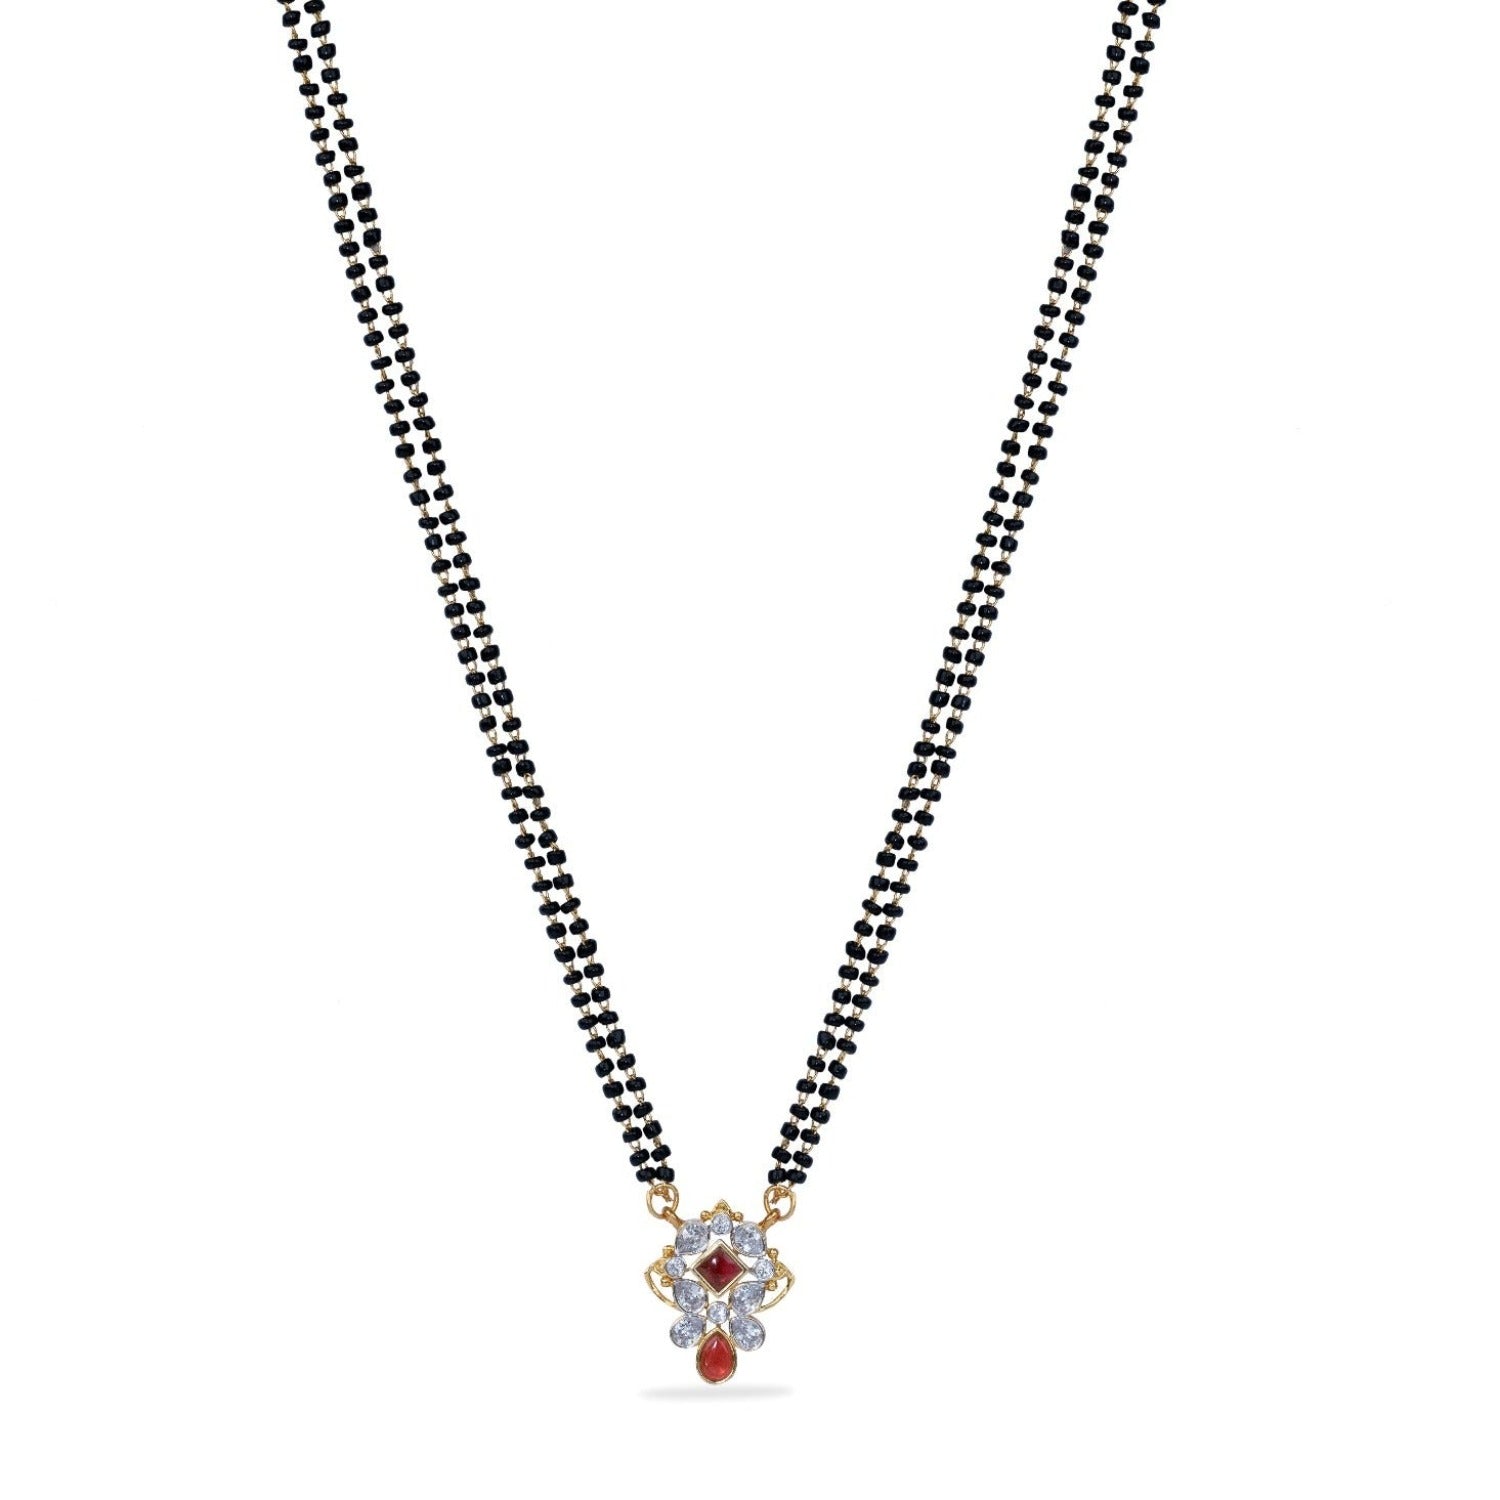 Buds Floral CZ White Red Black Beads Necklace